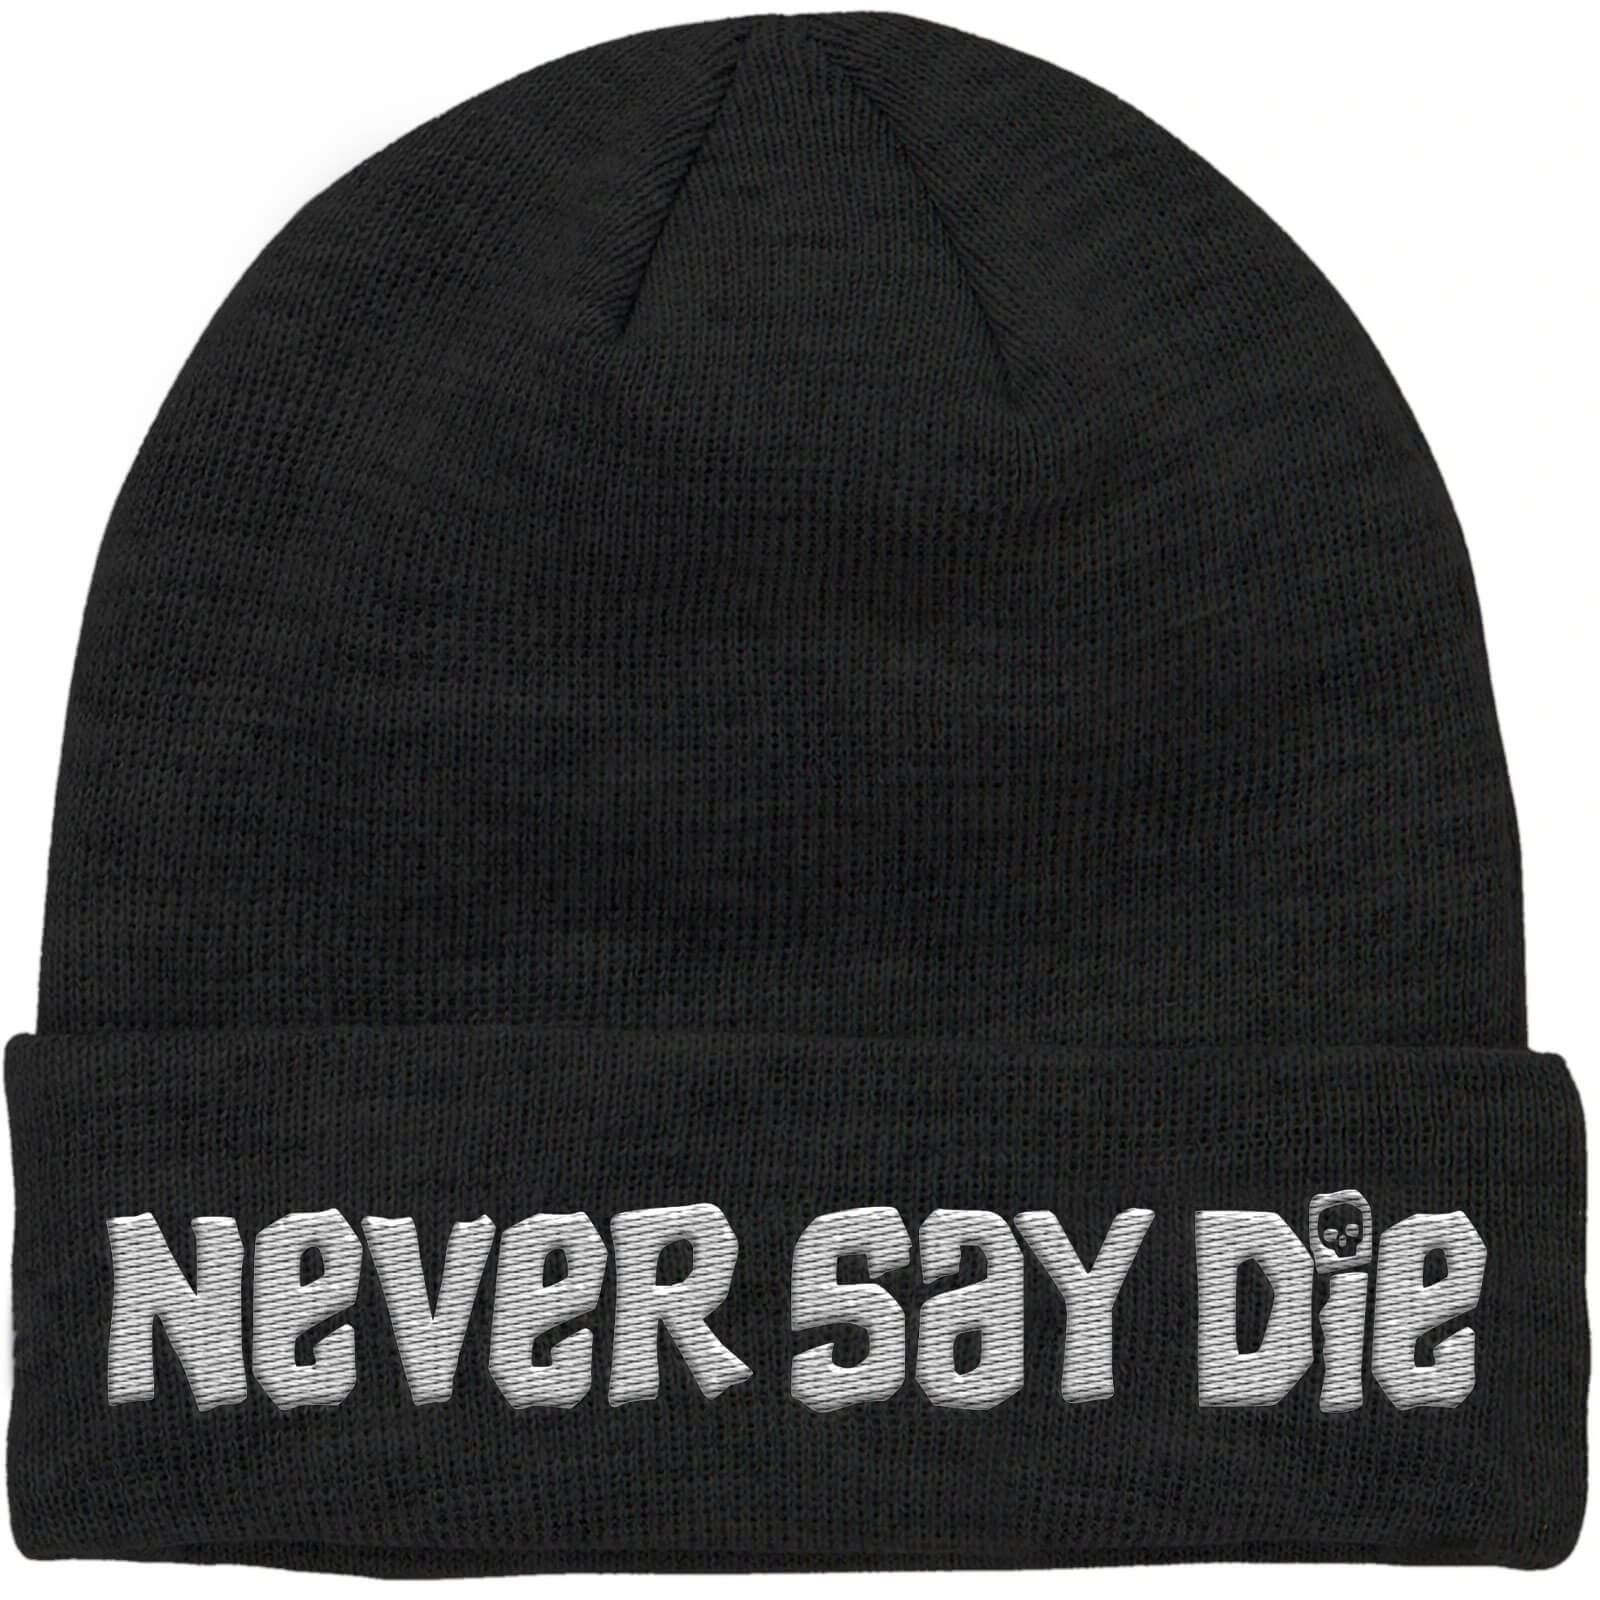 The Goonies Never Say Die Embroidered Beanie - Black